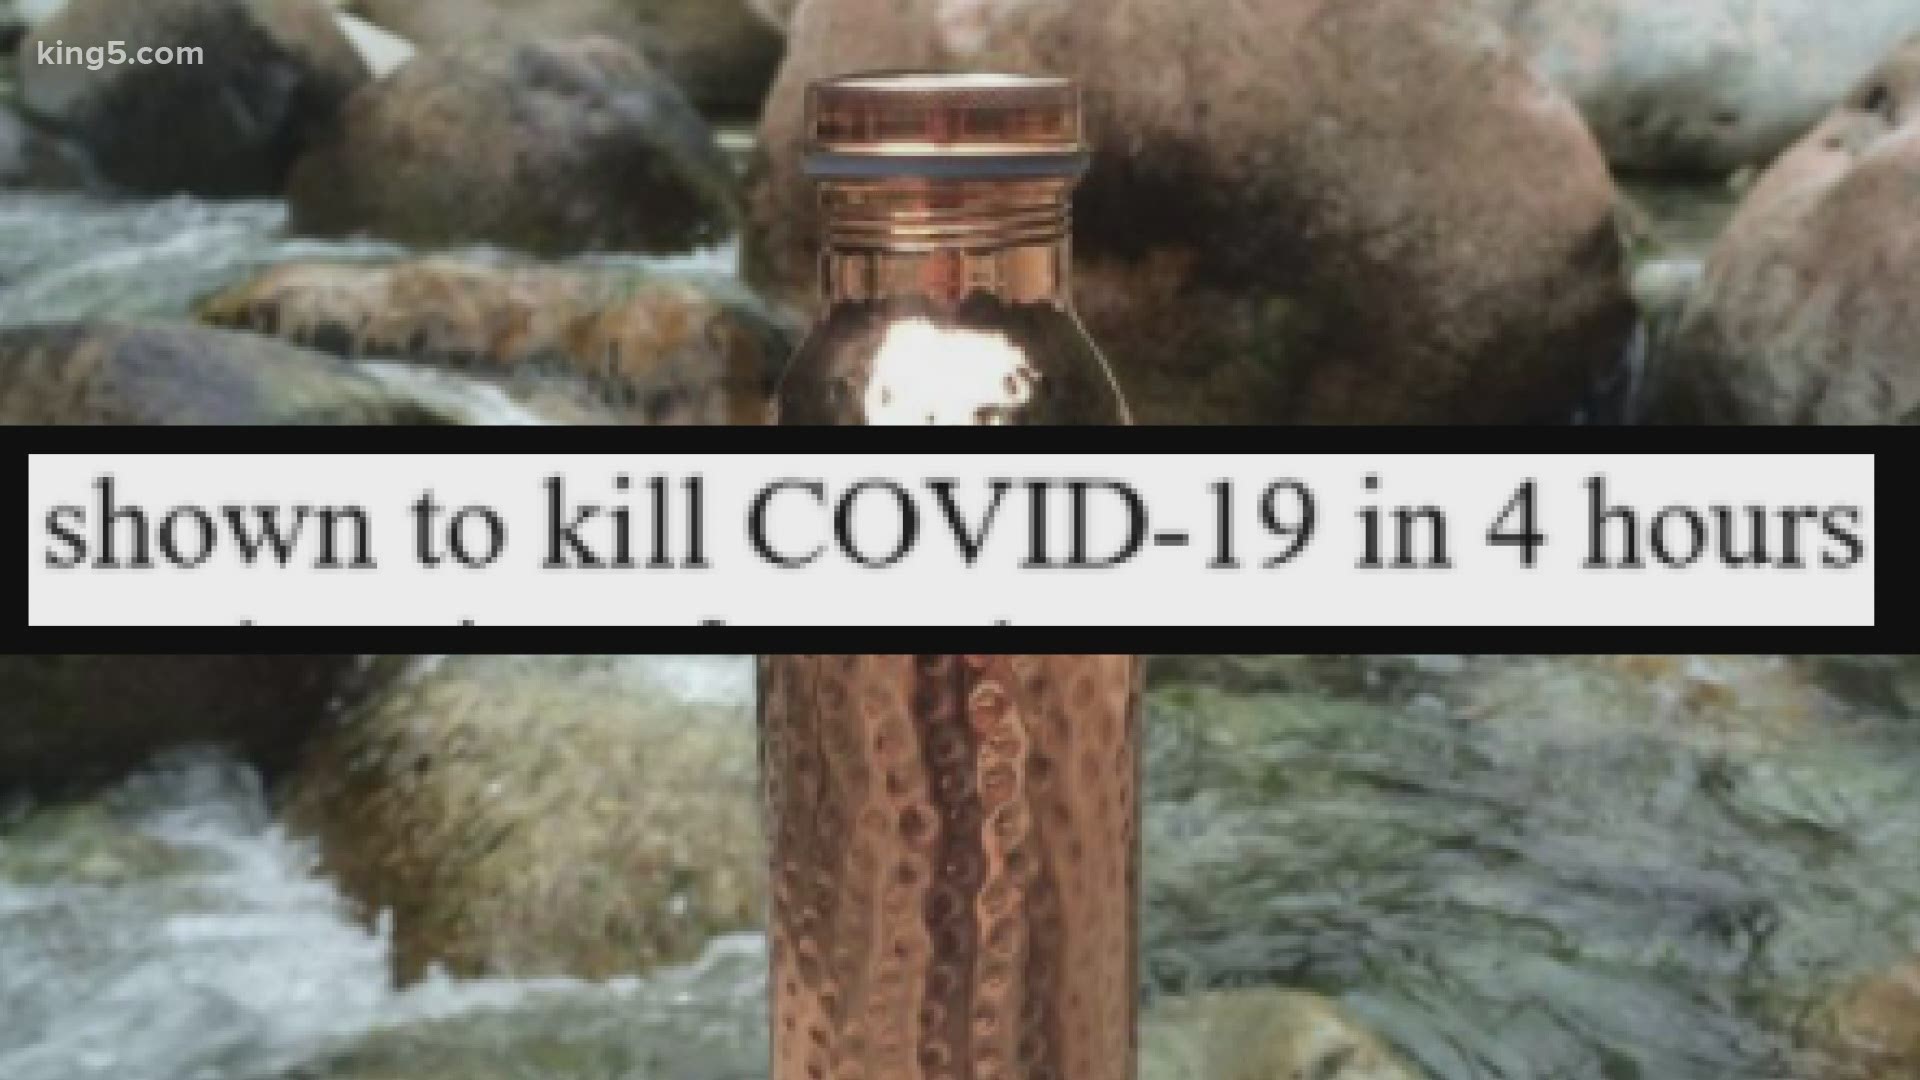 The company CopperH20 invites customers to "experience the benefits of a copper water bottle," and claims the product can protect people against getting COVID-19.